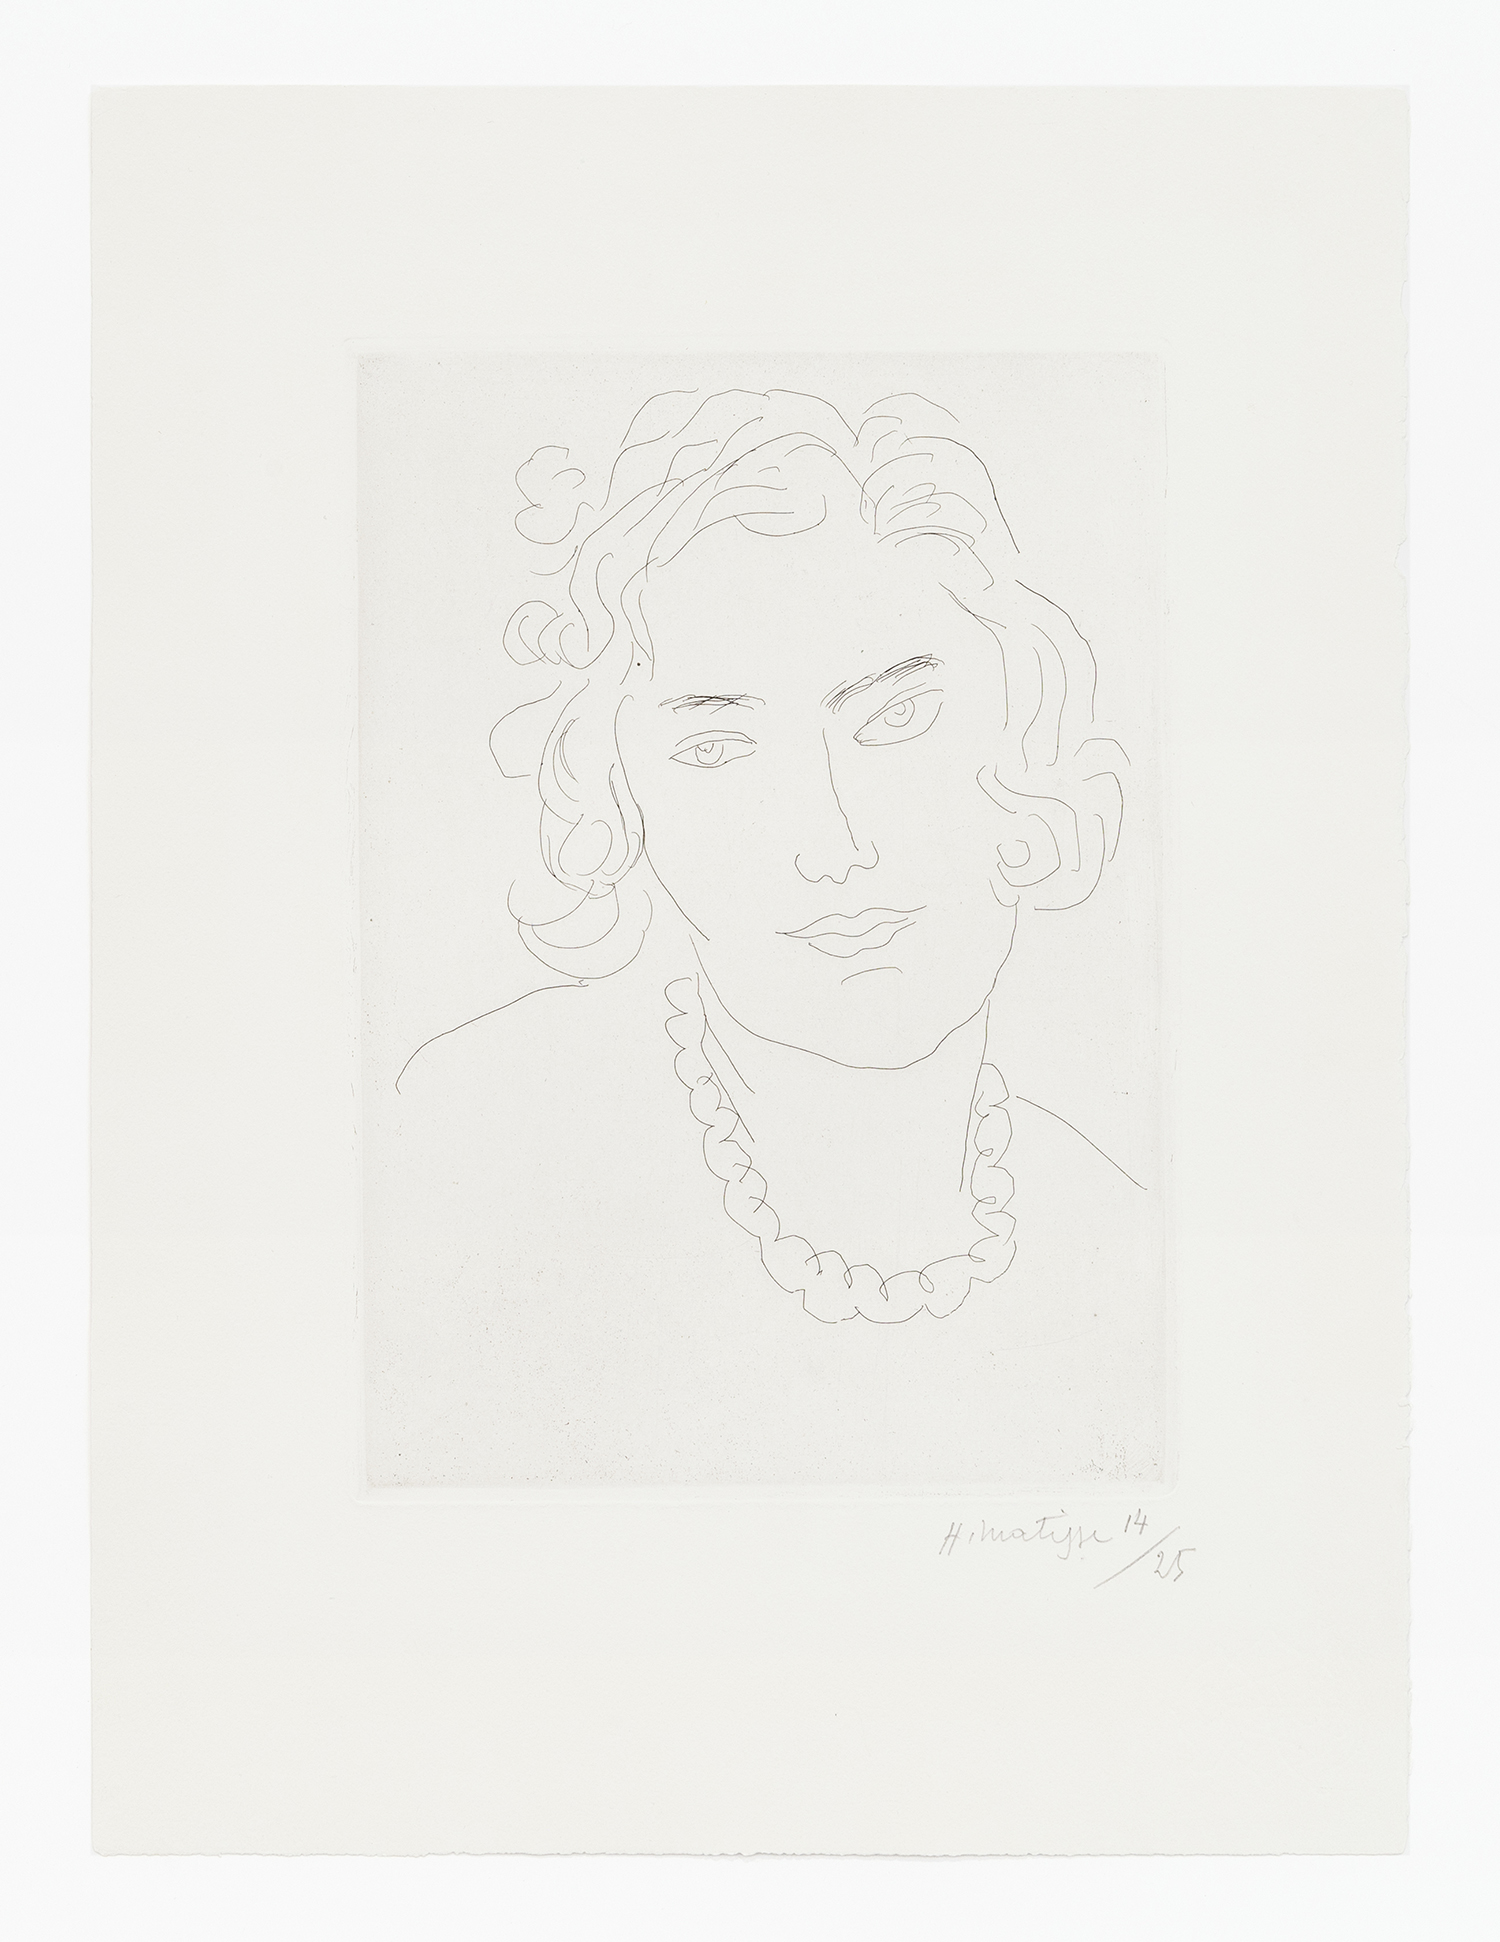 Henri Matisse Le Grand Collier, 1929 Etching Image Dimensions: 9 3/4 x 7 inches (24.8 x 17.8 cm) Paper Dimensions: 15 x 11 inches (38.1 x 27.9 cm) Framed Dimensions: 19 11/16 x 16 5/8 x 1 1/16 inches (50 x 42.2 x 2.7 cm) Edition of 25